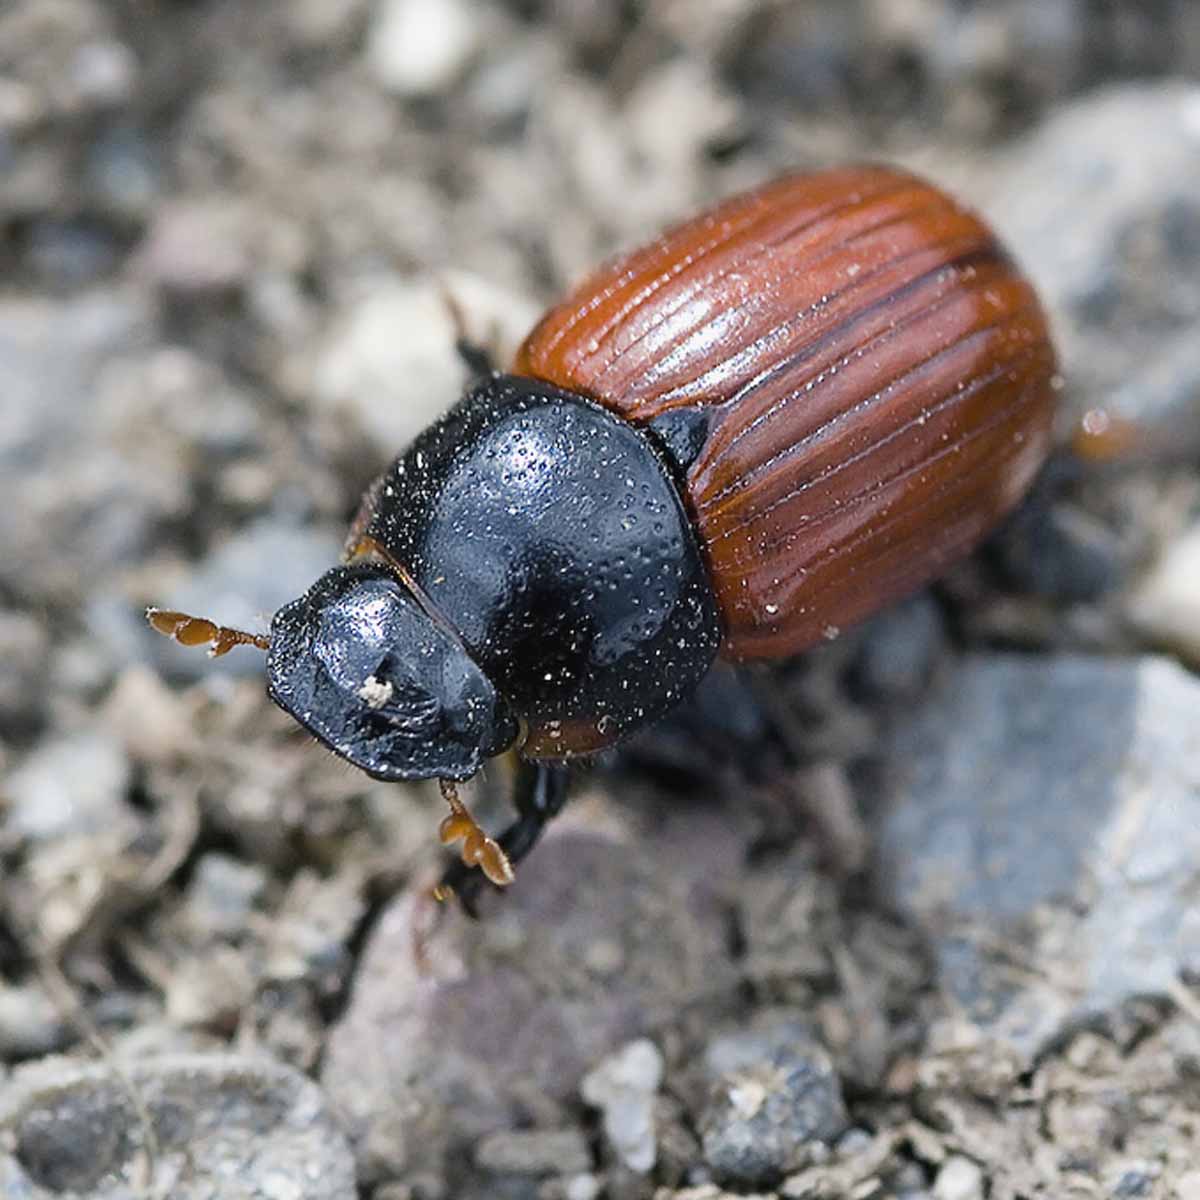 A dung beetle on gravel